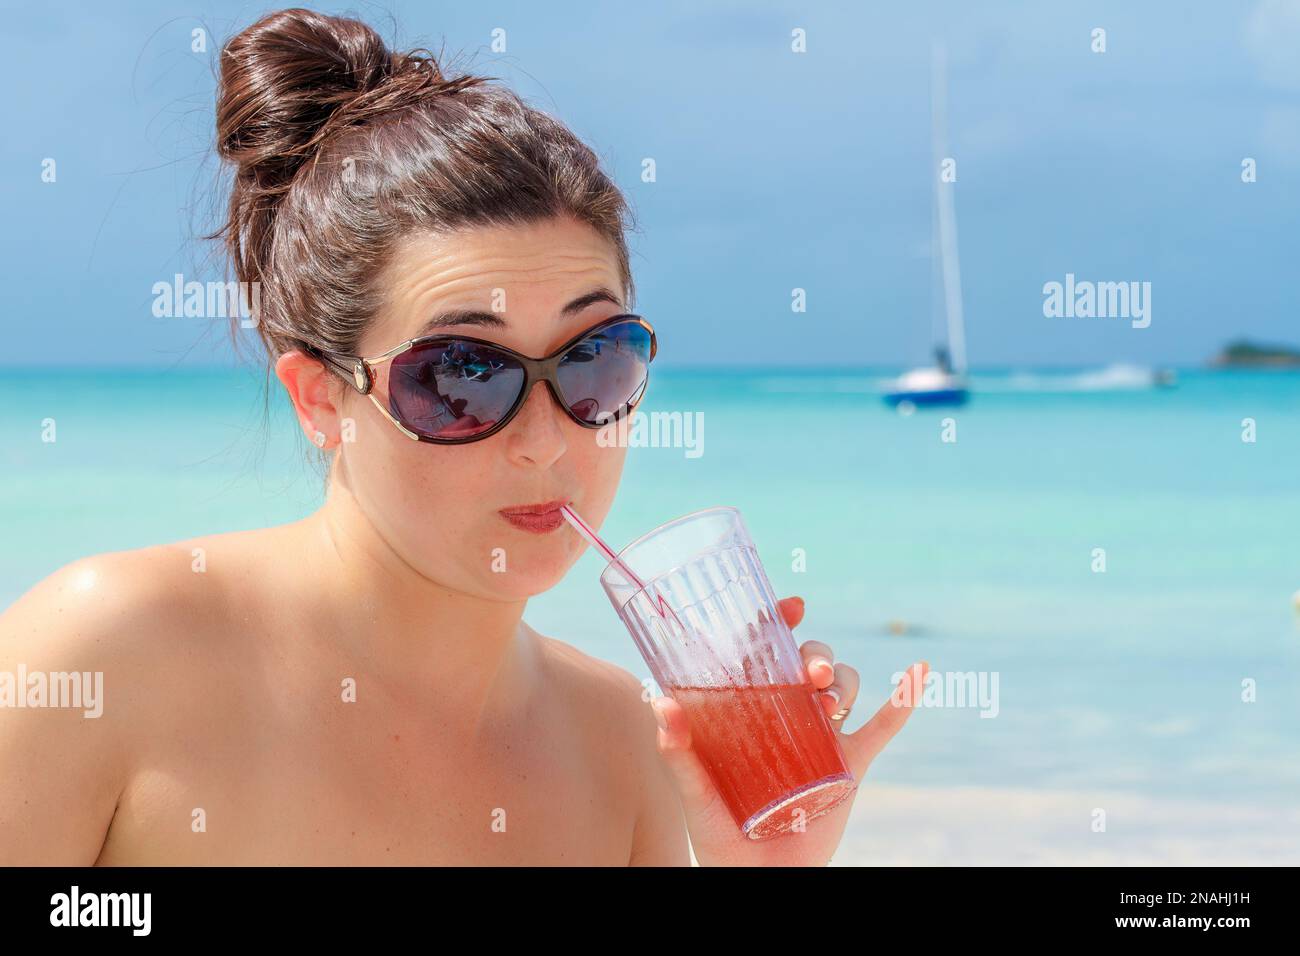 Cherry smoothie in a big glass cup with two straws in woman's hands,  isolated on white background. Lady with a drink Stock Photo - Alamy